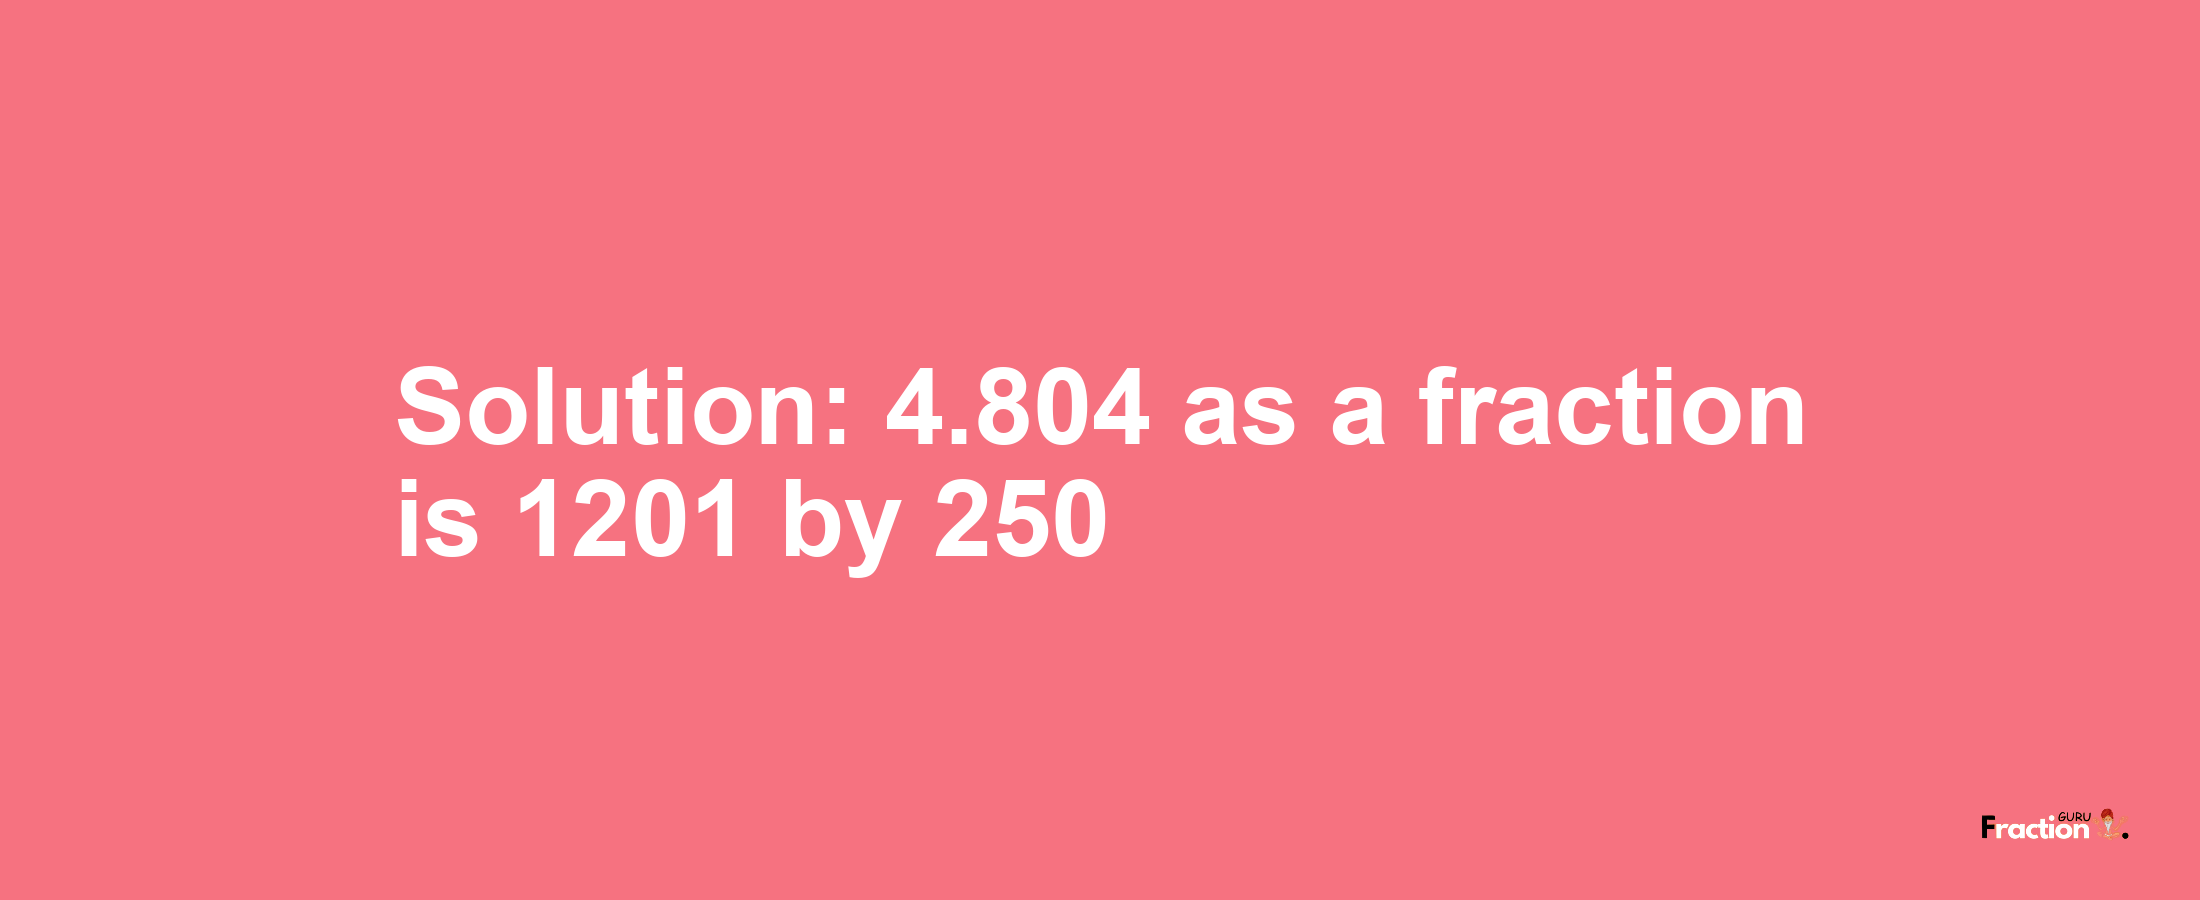 Solution:4.804 as a fraction is 1201/250